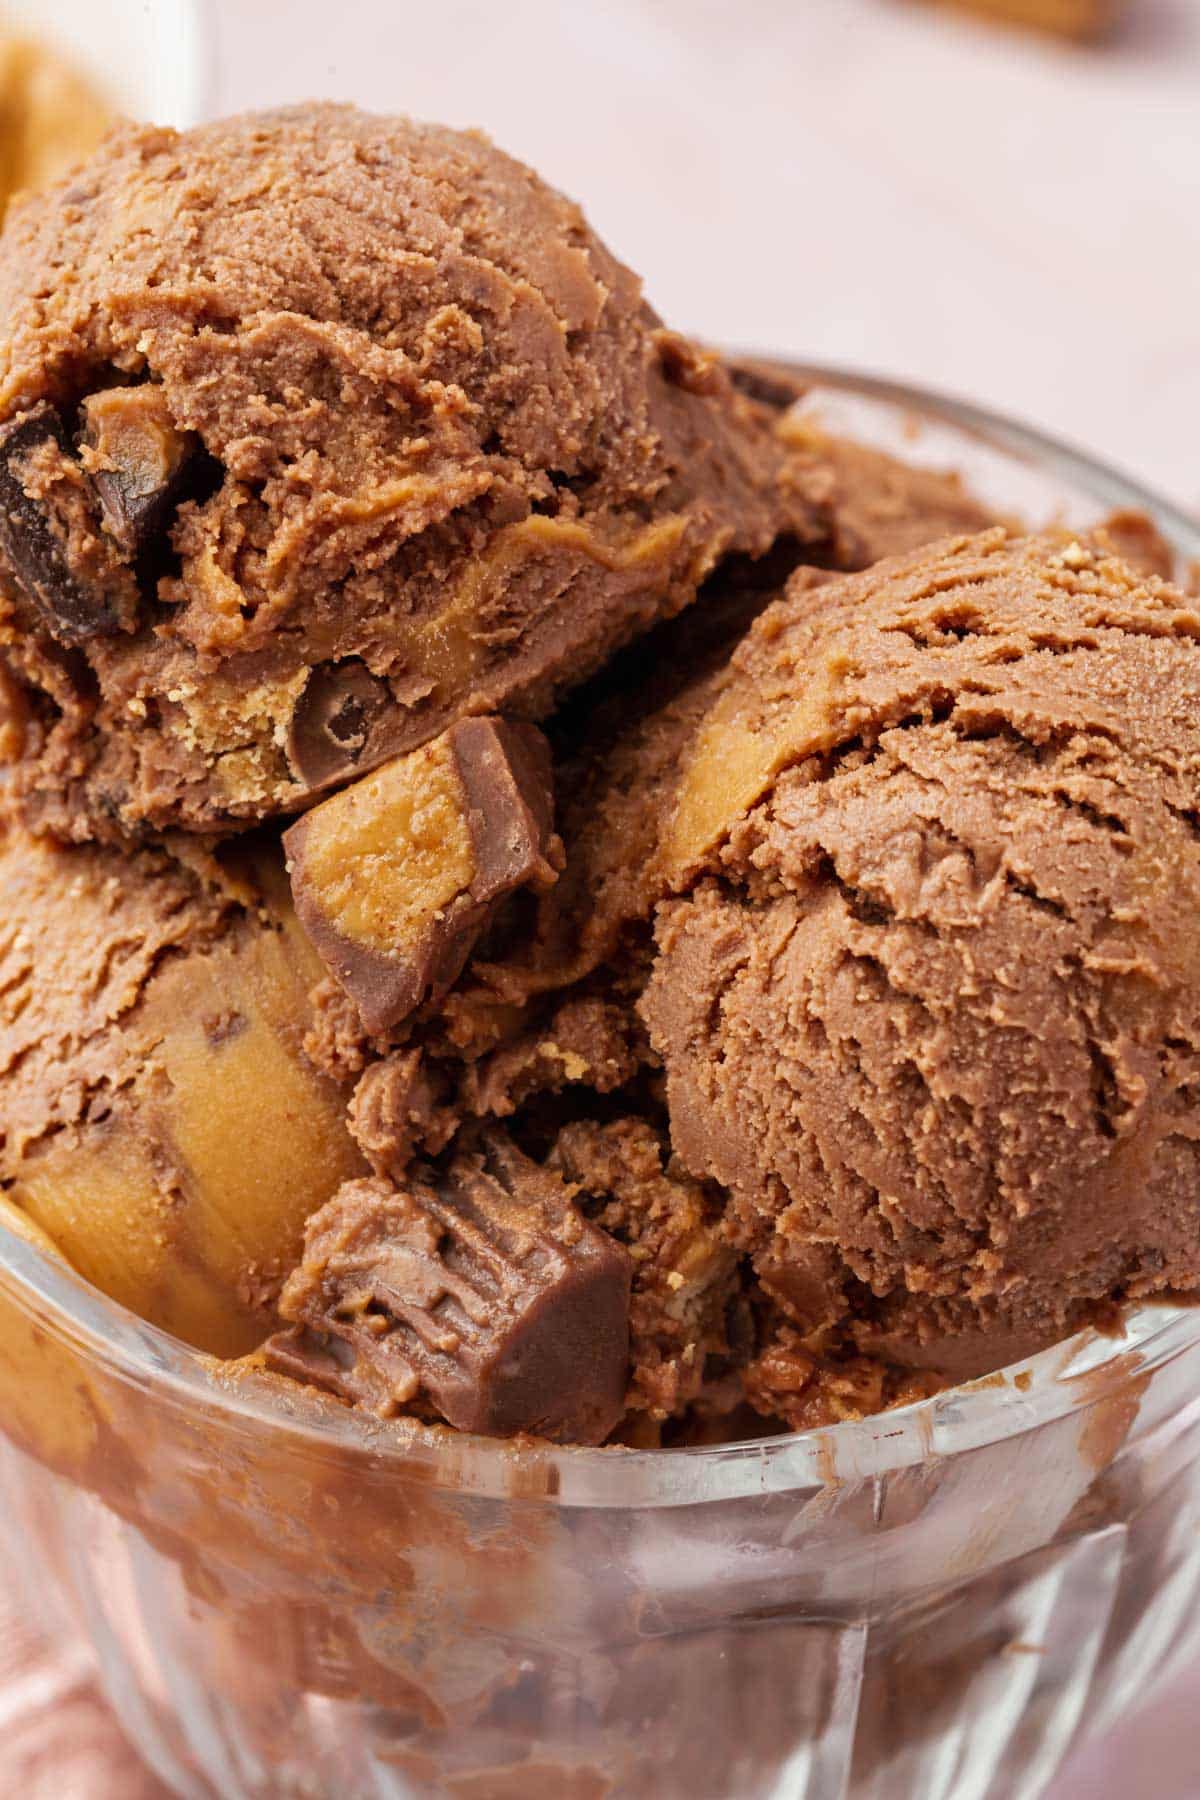 A close up of scoops of chocolate peanut butter cup ice cream.